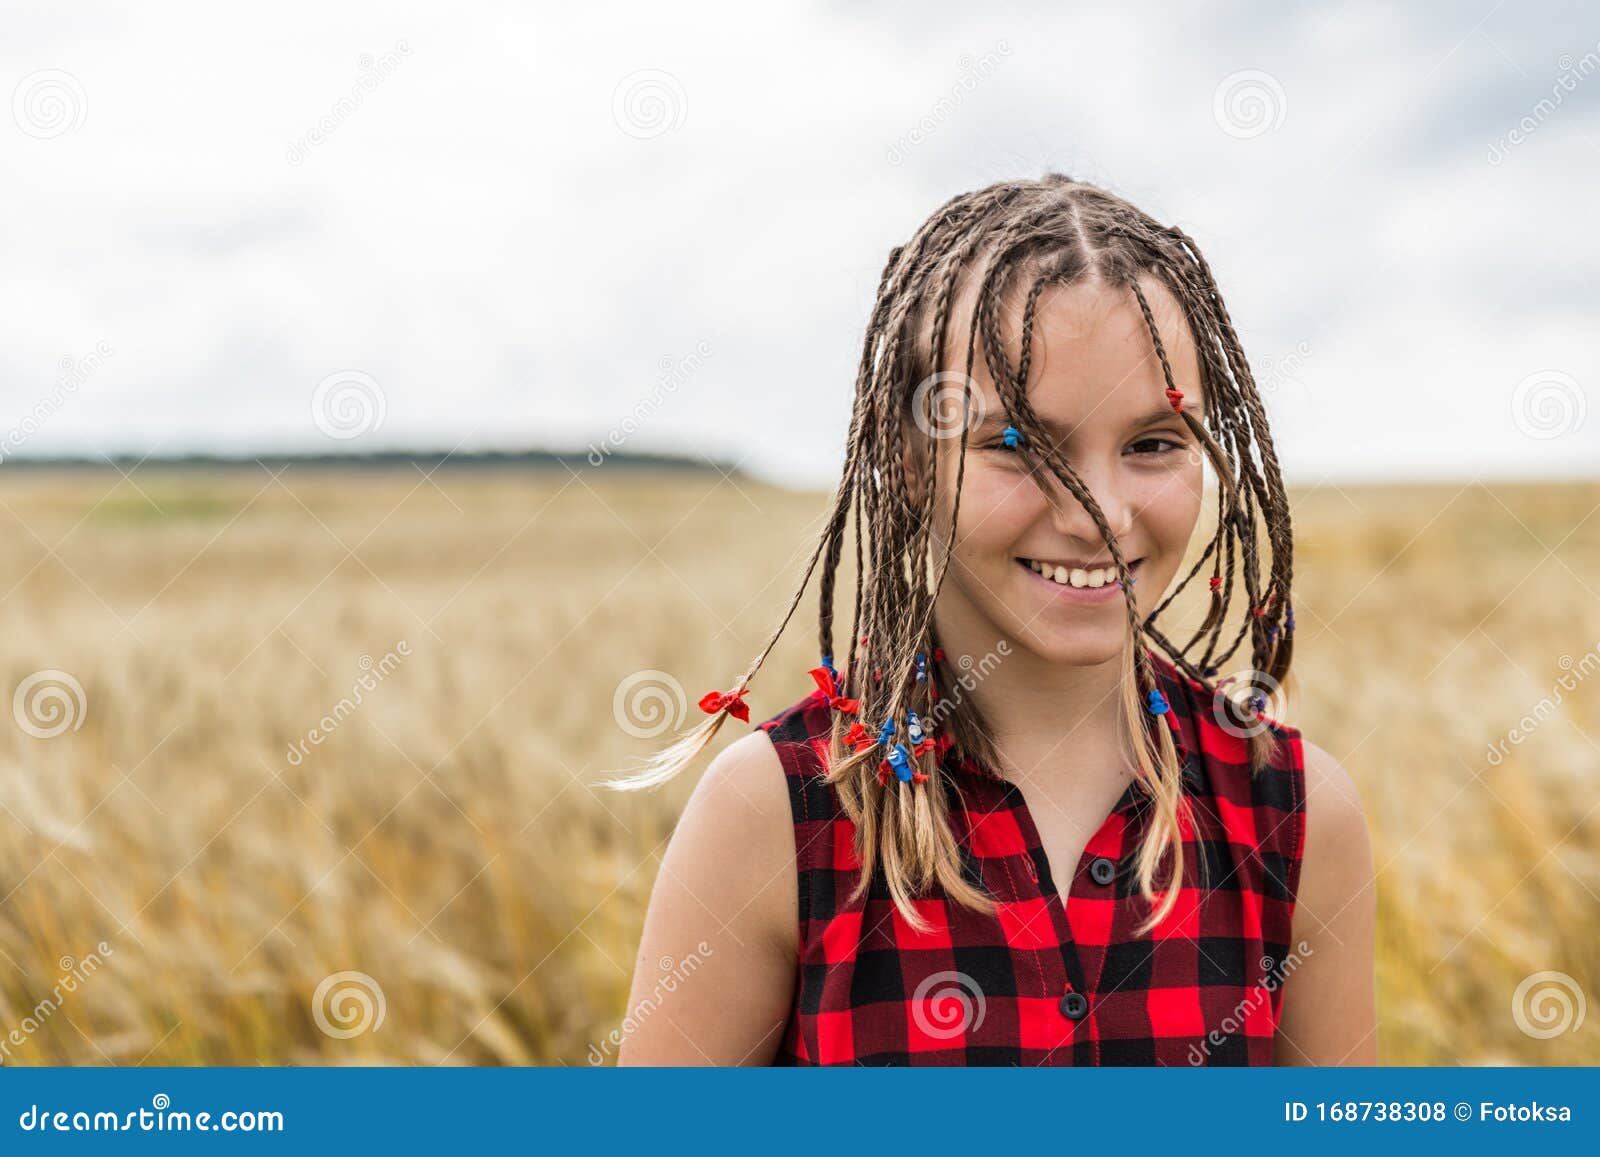 Smiling Teenage Girl With Braids Sitting In Wheat Field At 